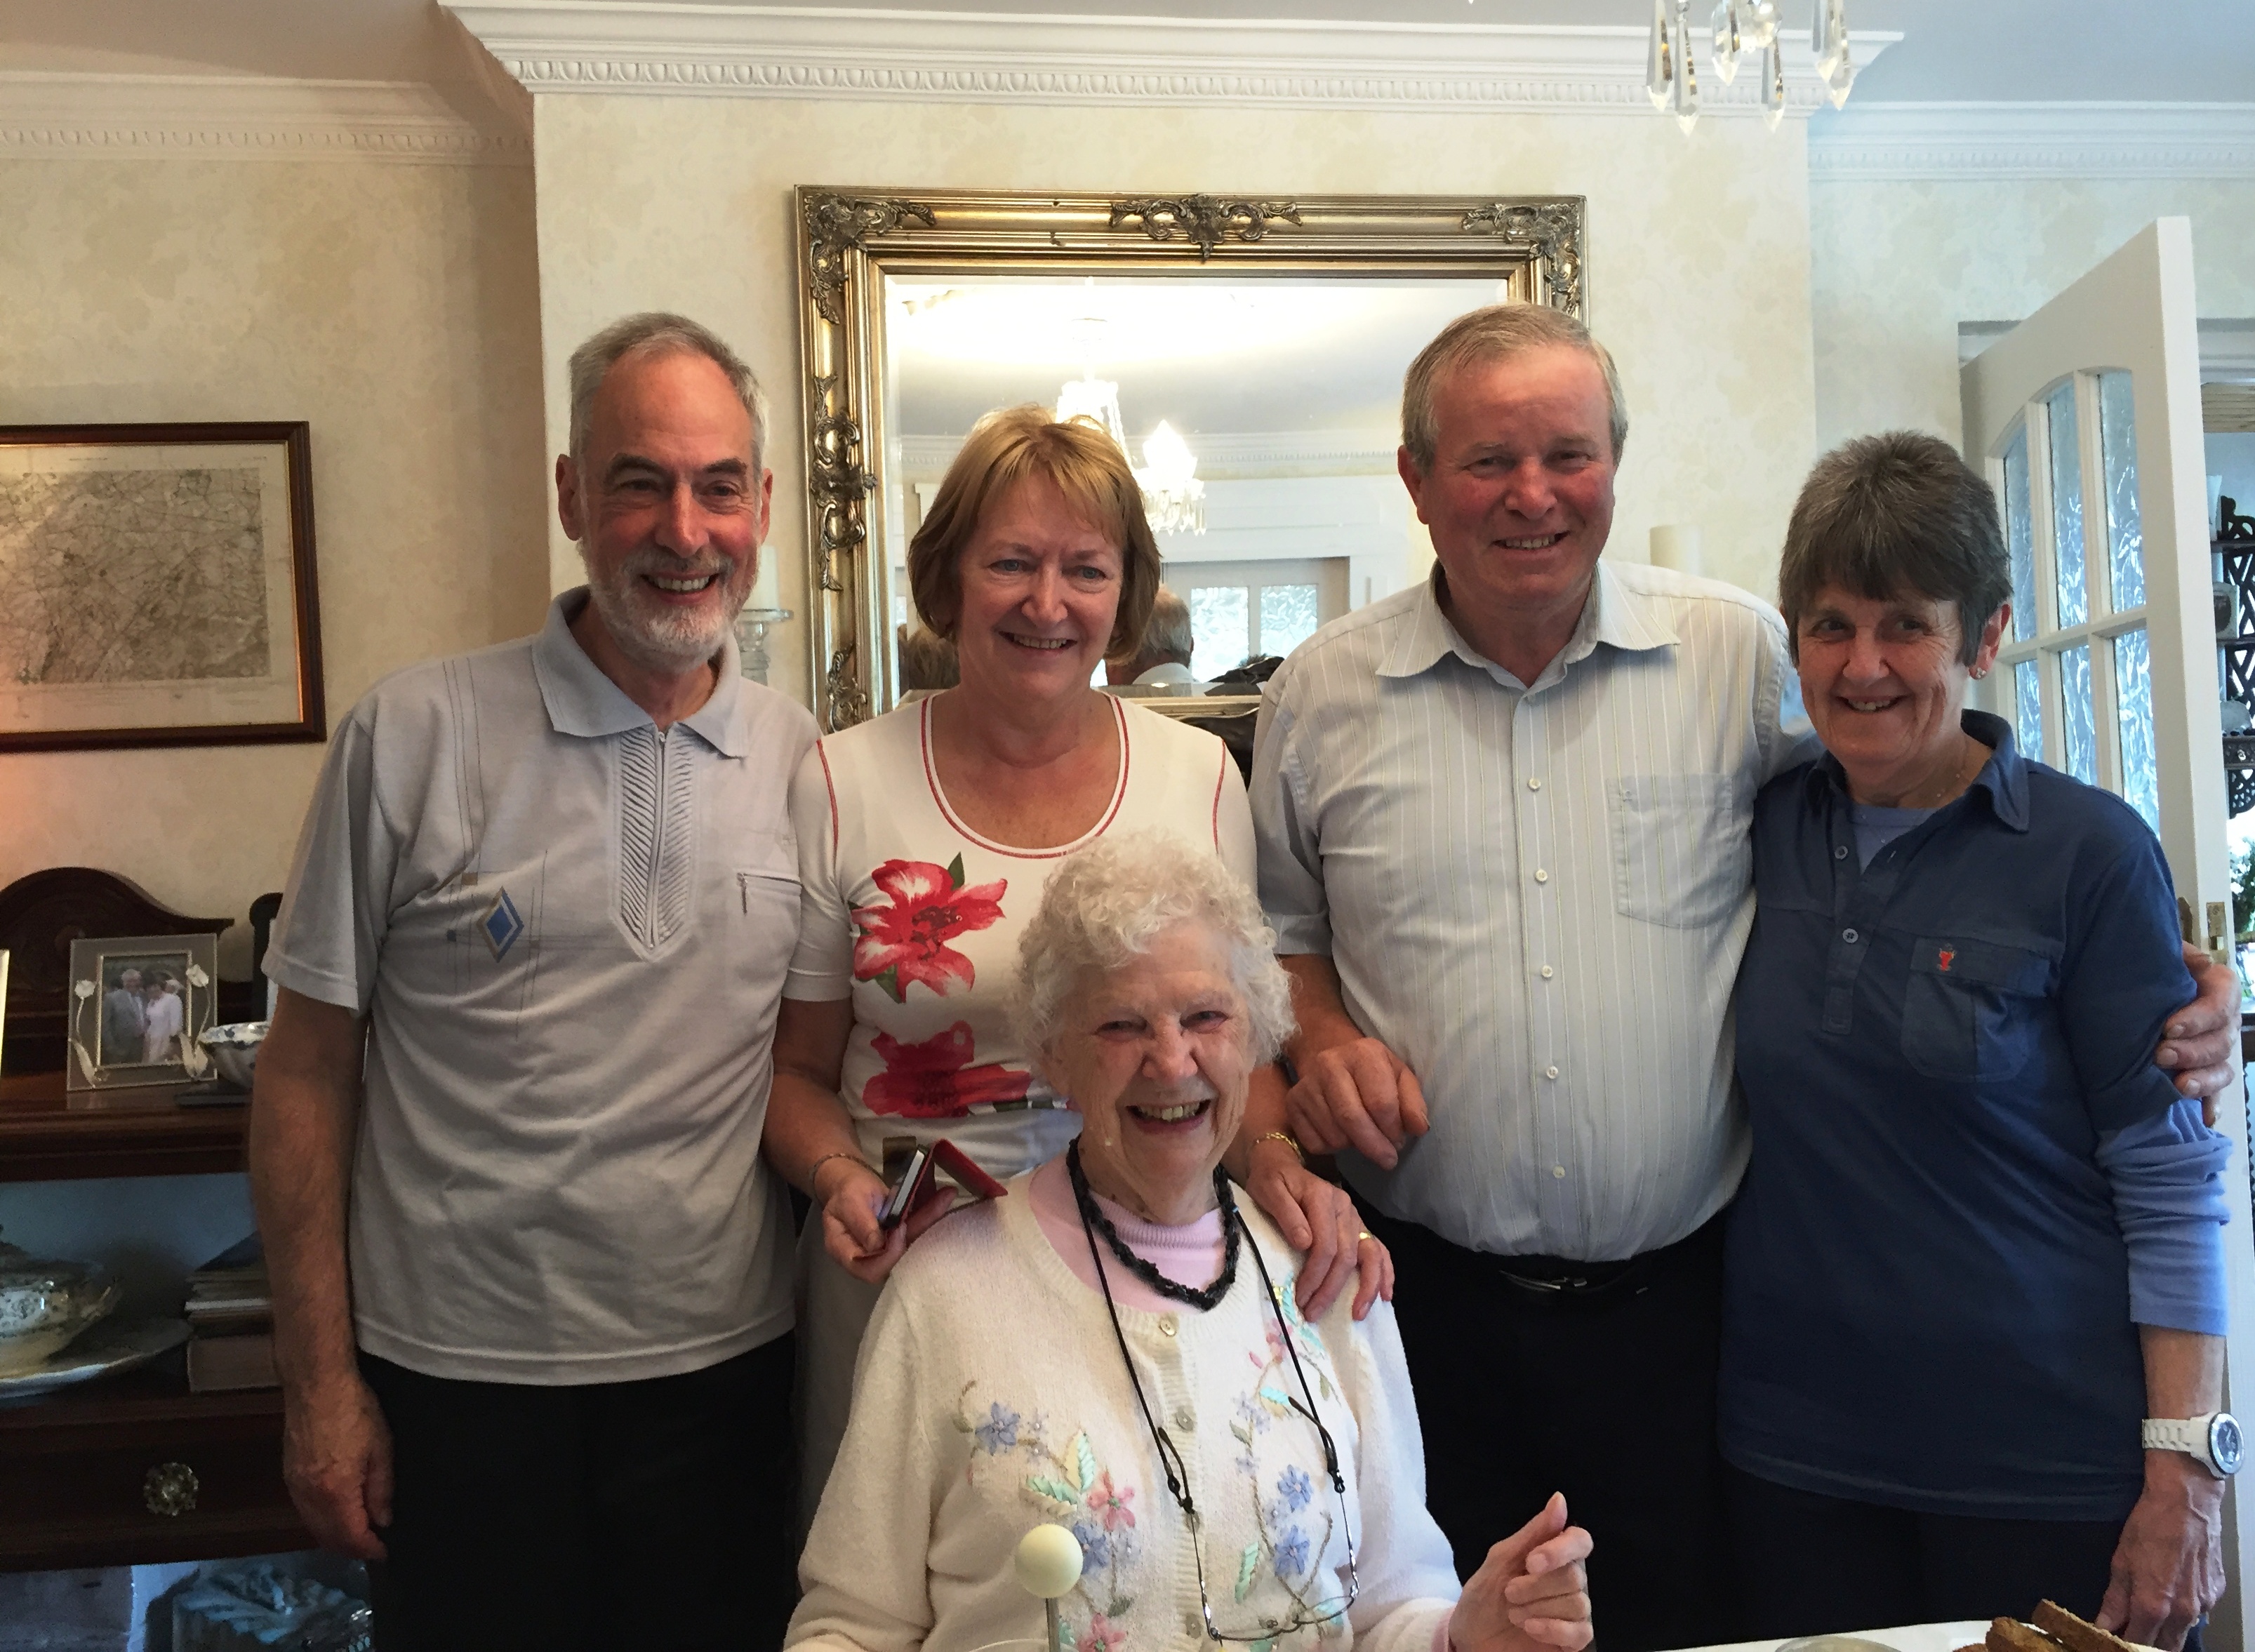 John, Brenda, Micheal, and Lynn -- new friends at Clareview House B&B, join us in wishing Roberta a happy 93rd birthday. Photo by Martha Clark.